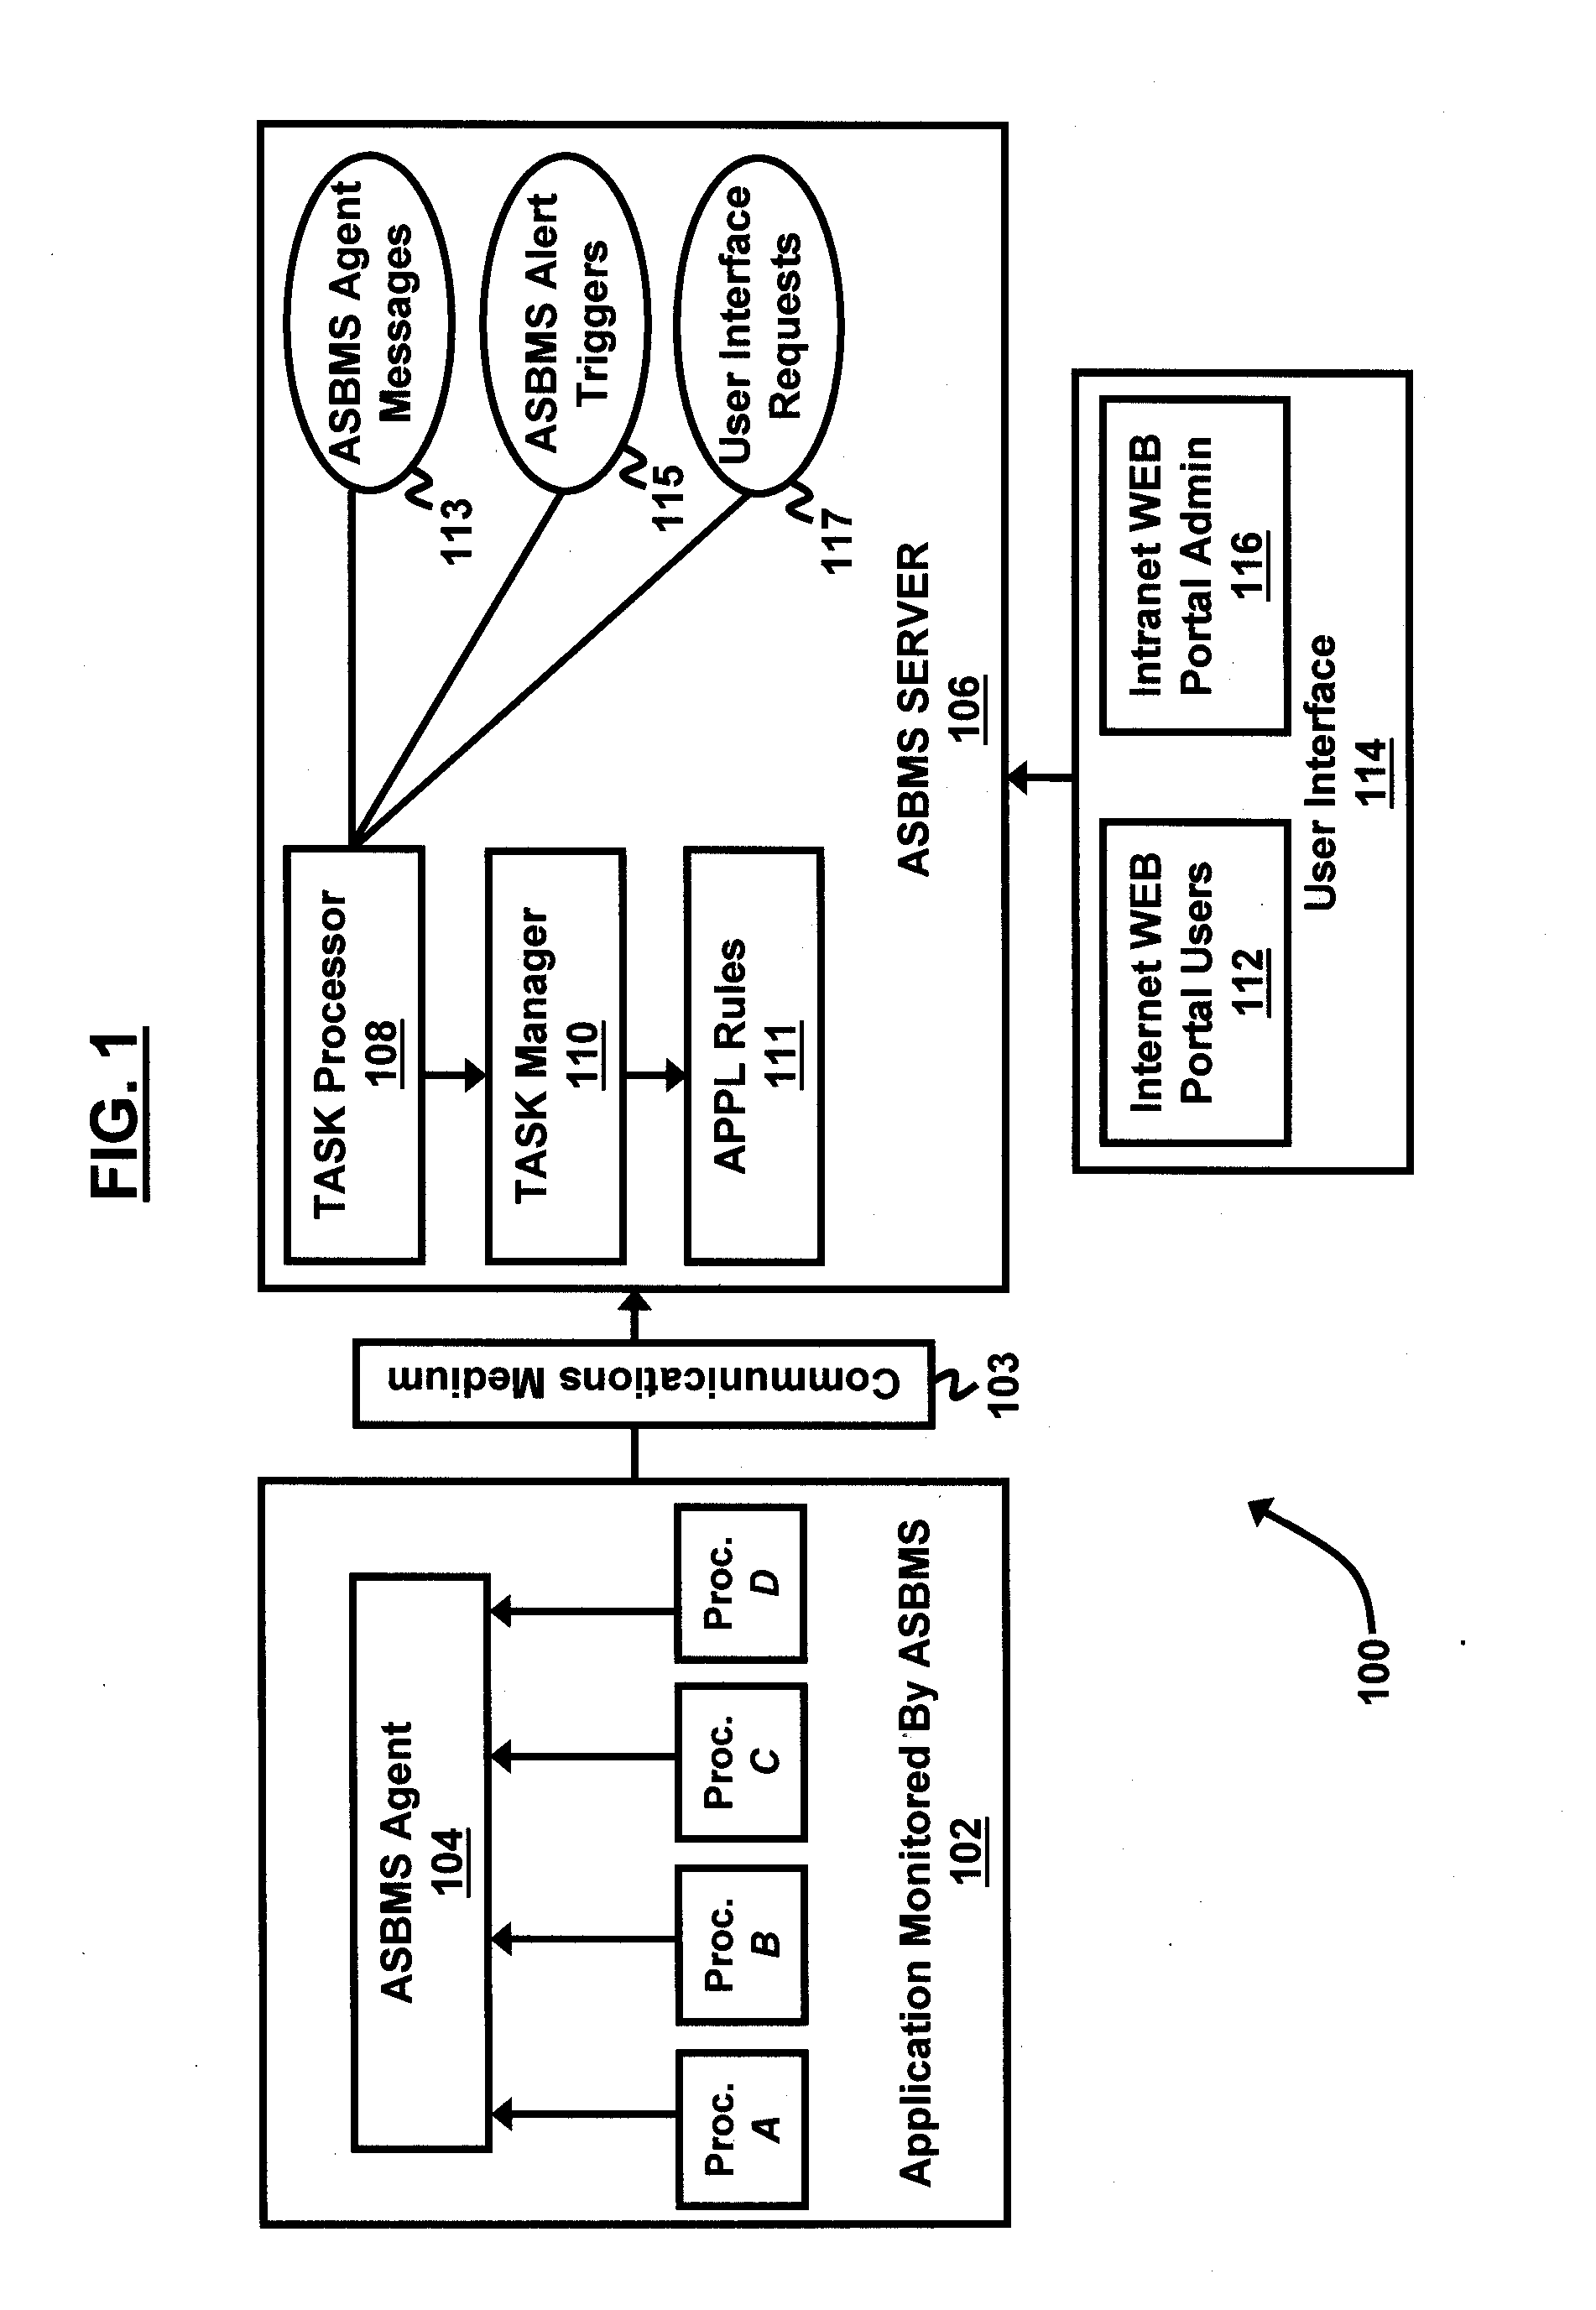 Application status board mitigation system and method